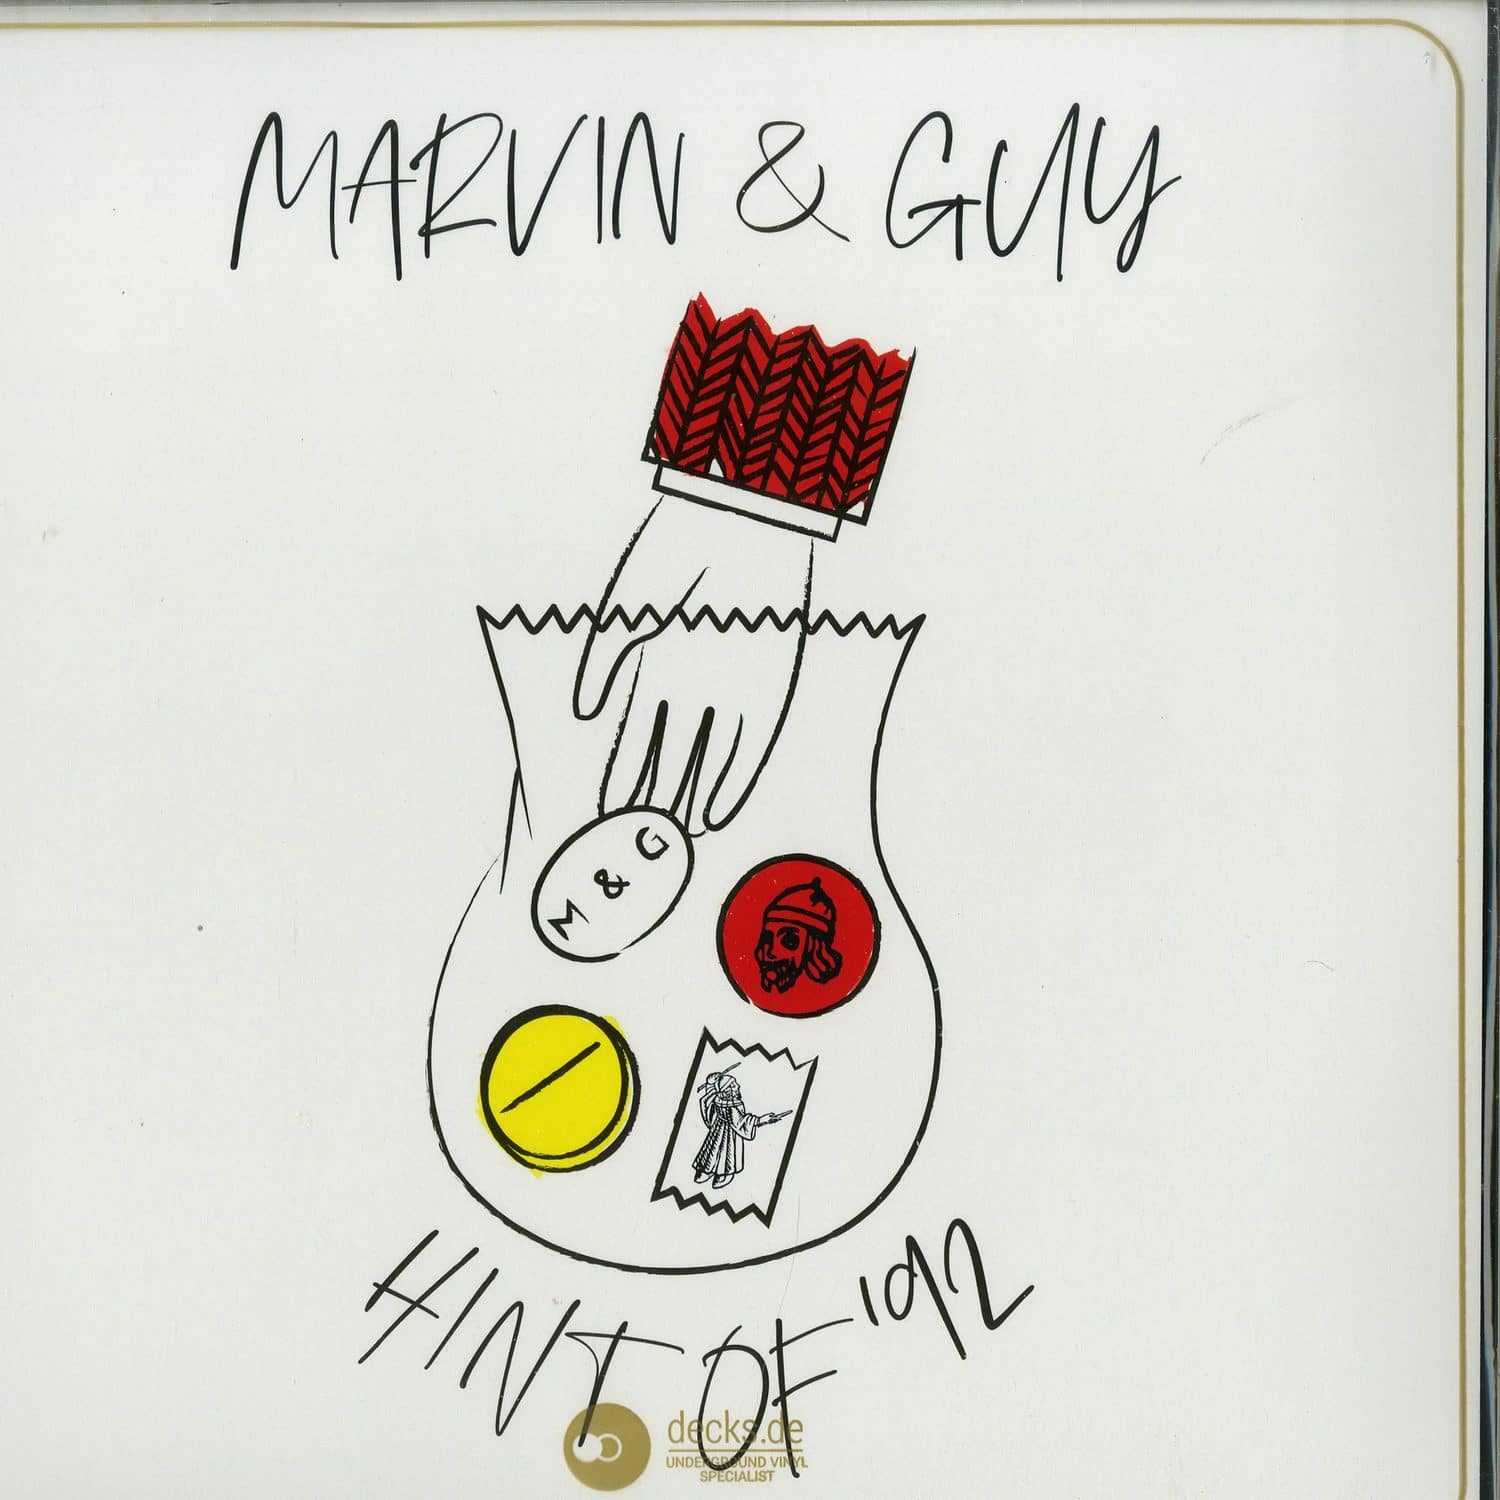 Marvin & Guy - HINT OF 92 